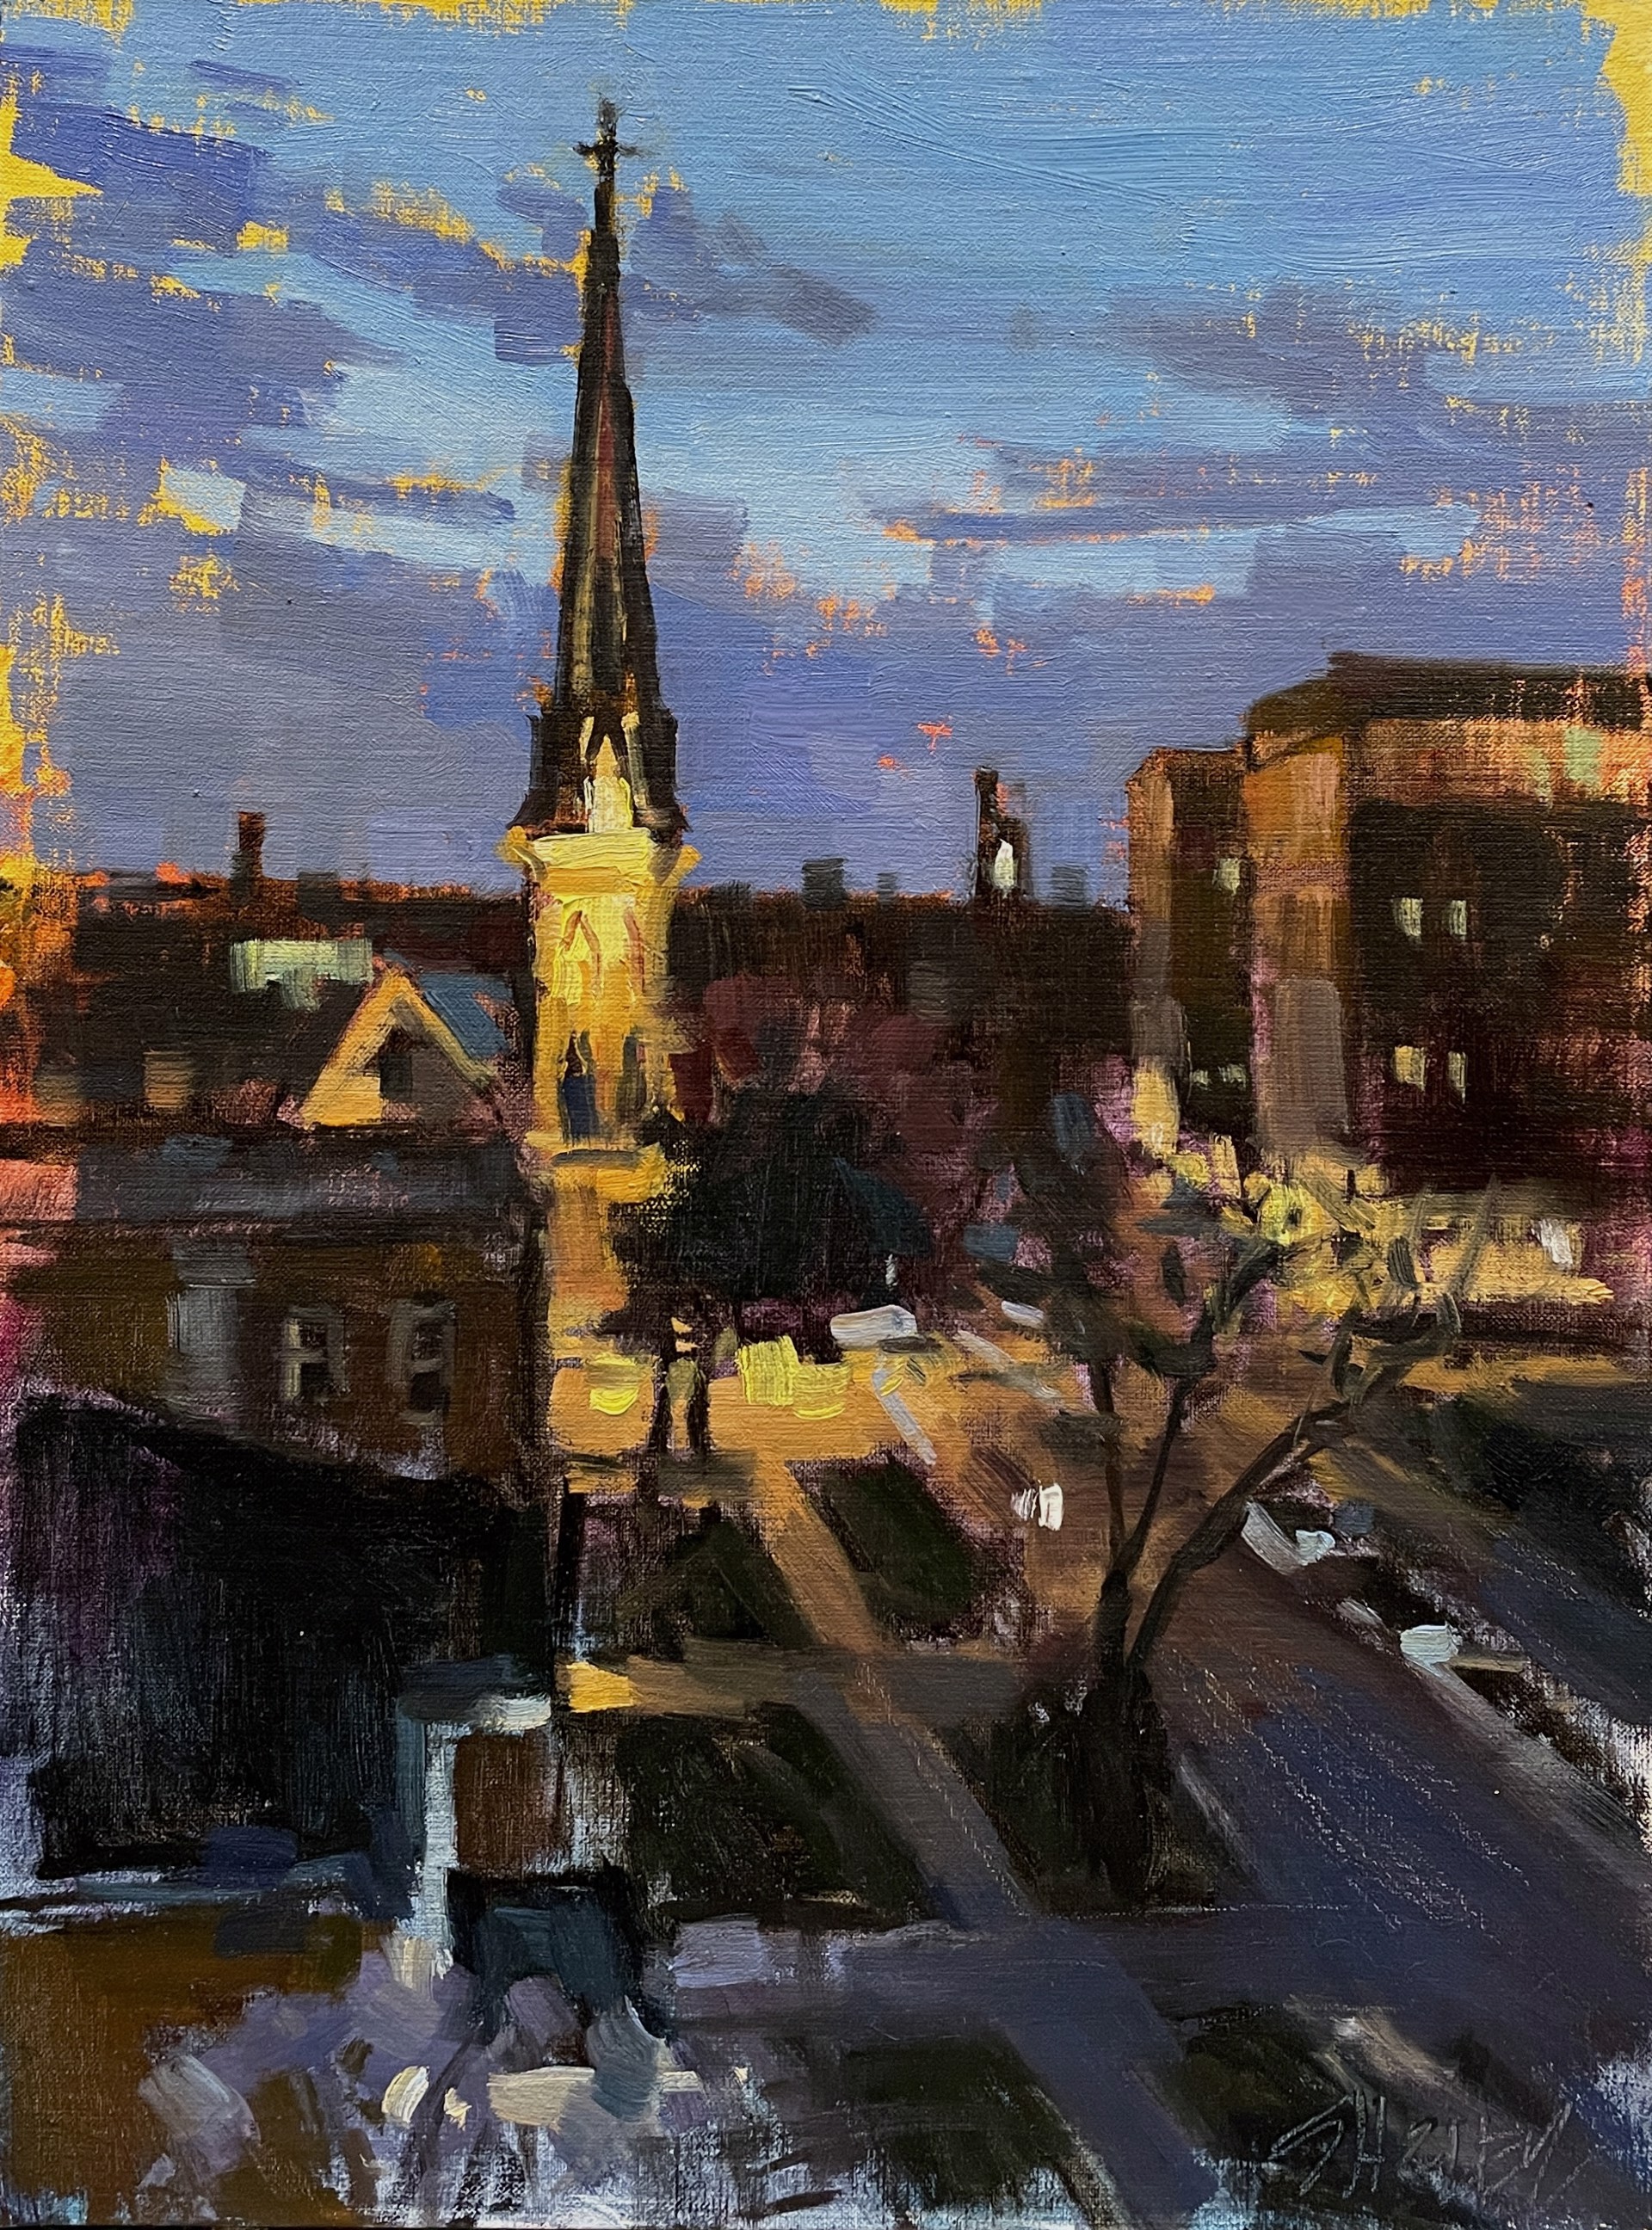 Night Church by Shelby Keefe